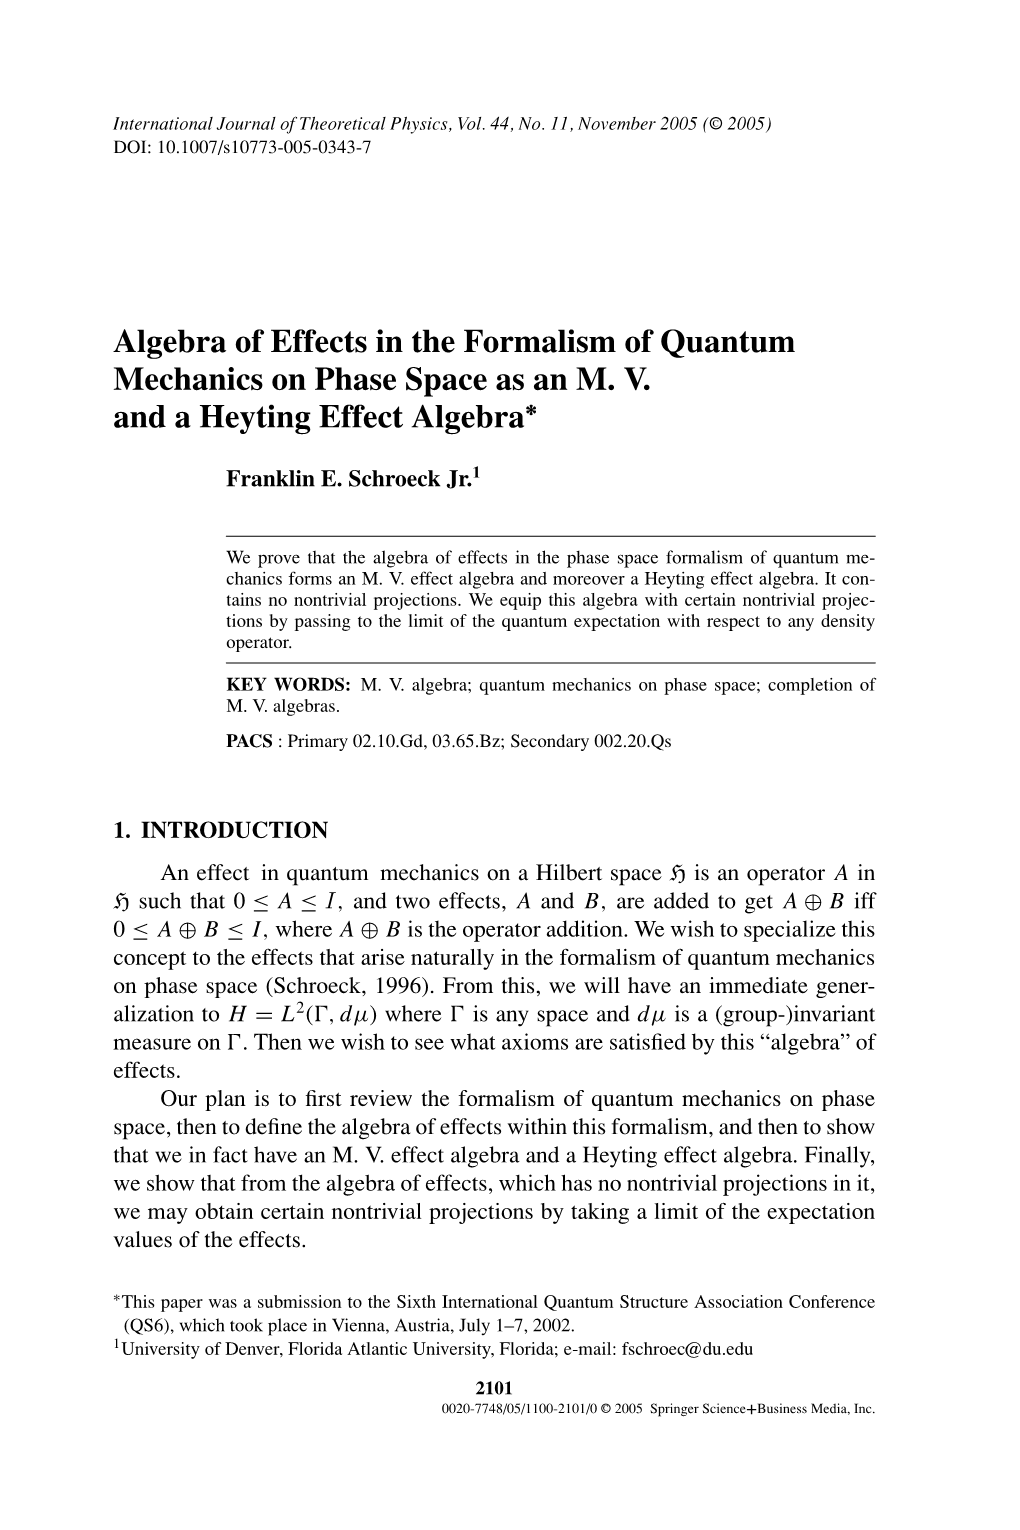 Algebra of Effects in the Formalism of Quantum Mechanics on Phase Space As an M. V. and a Heyting Effect Algebra∗